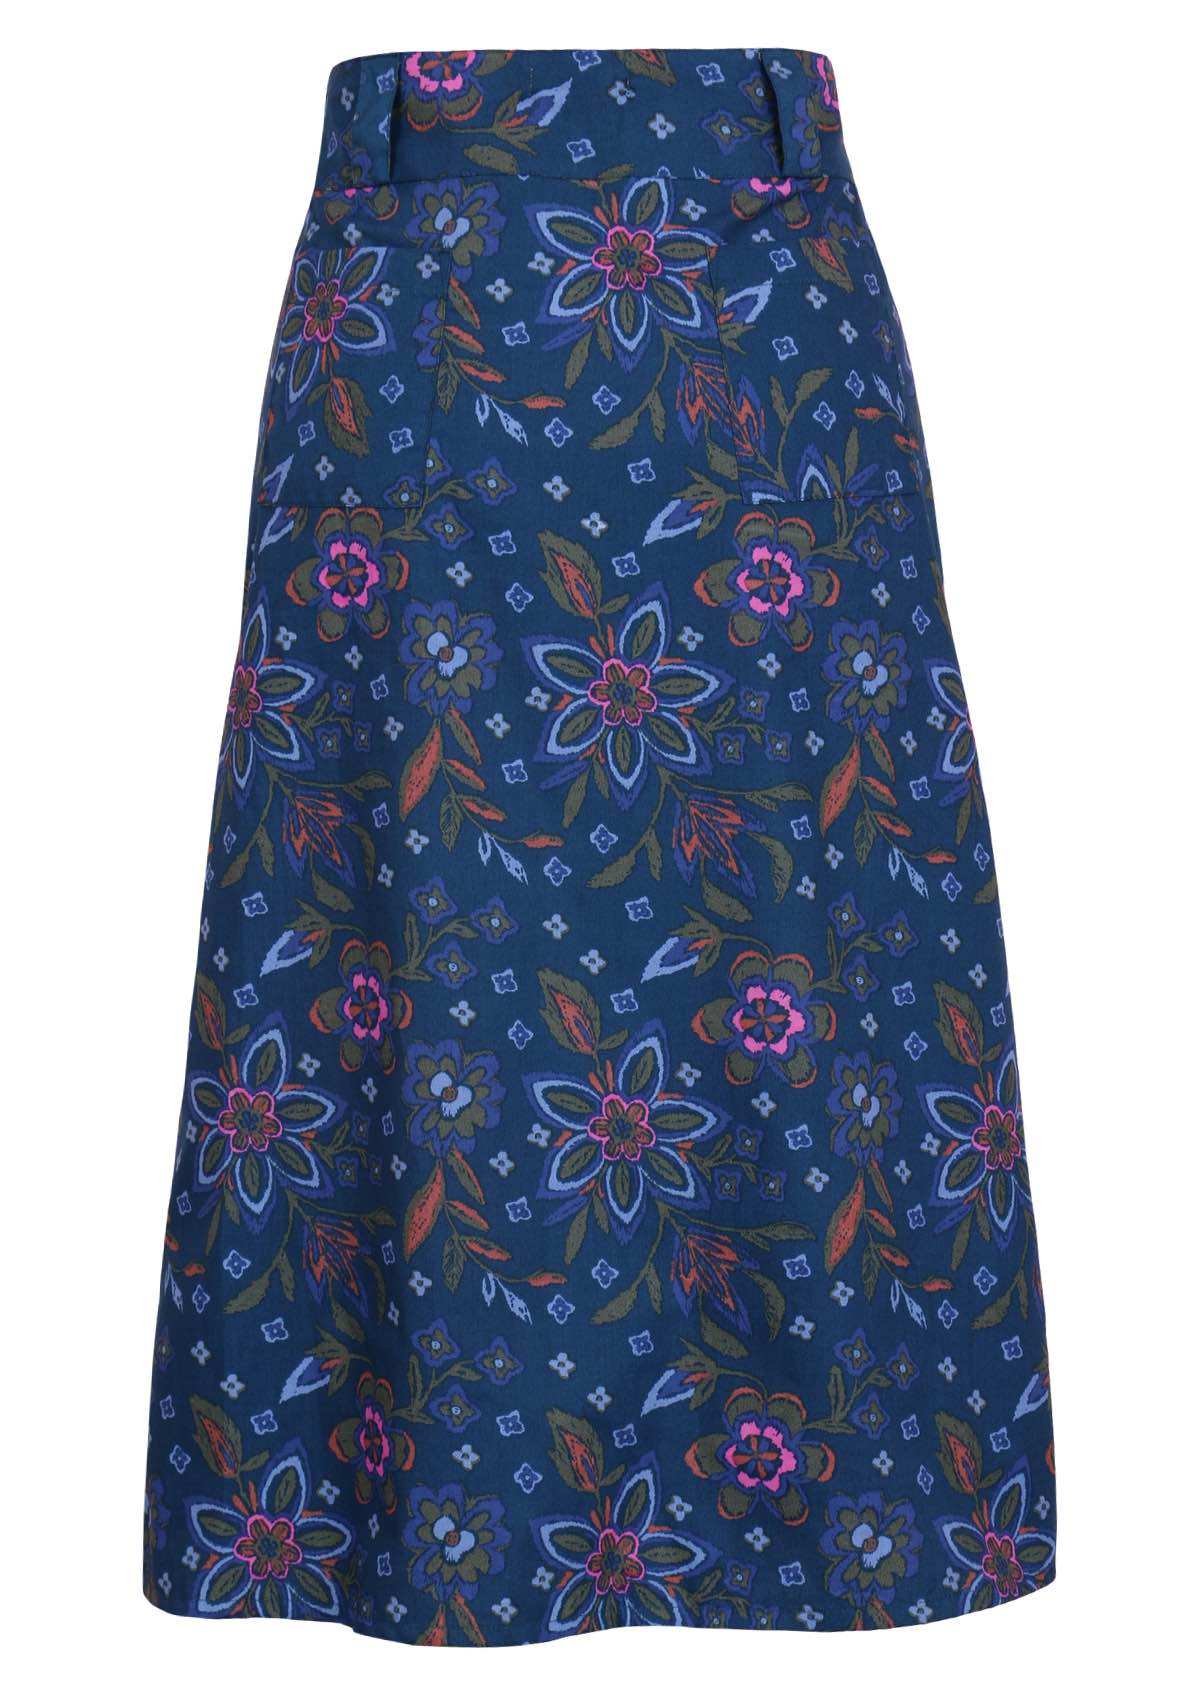 Blue belt loop skirt has a side zip and pockets on the back.